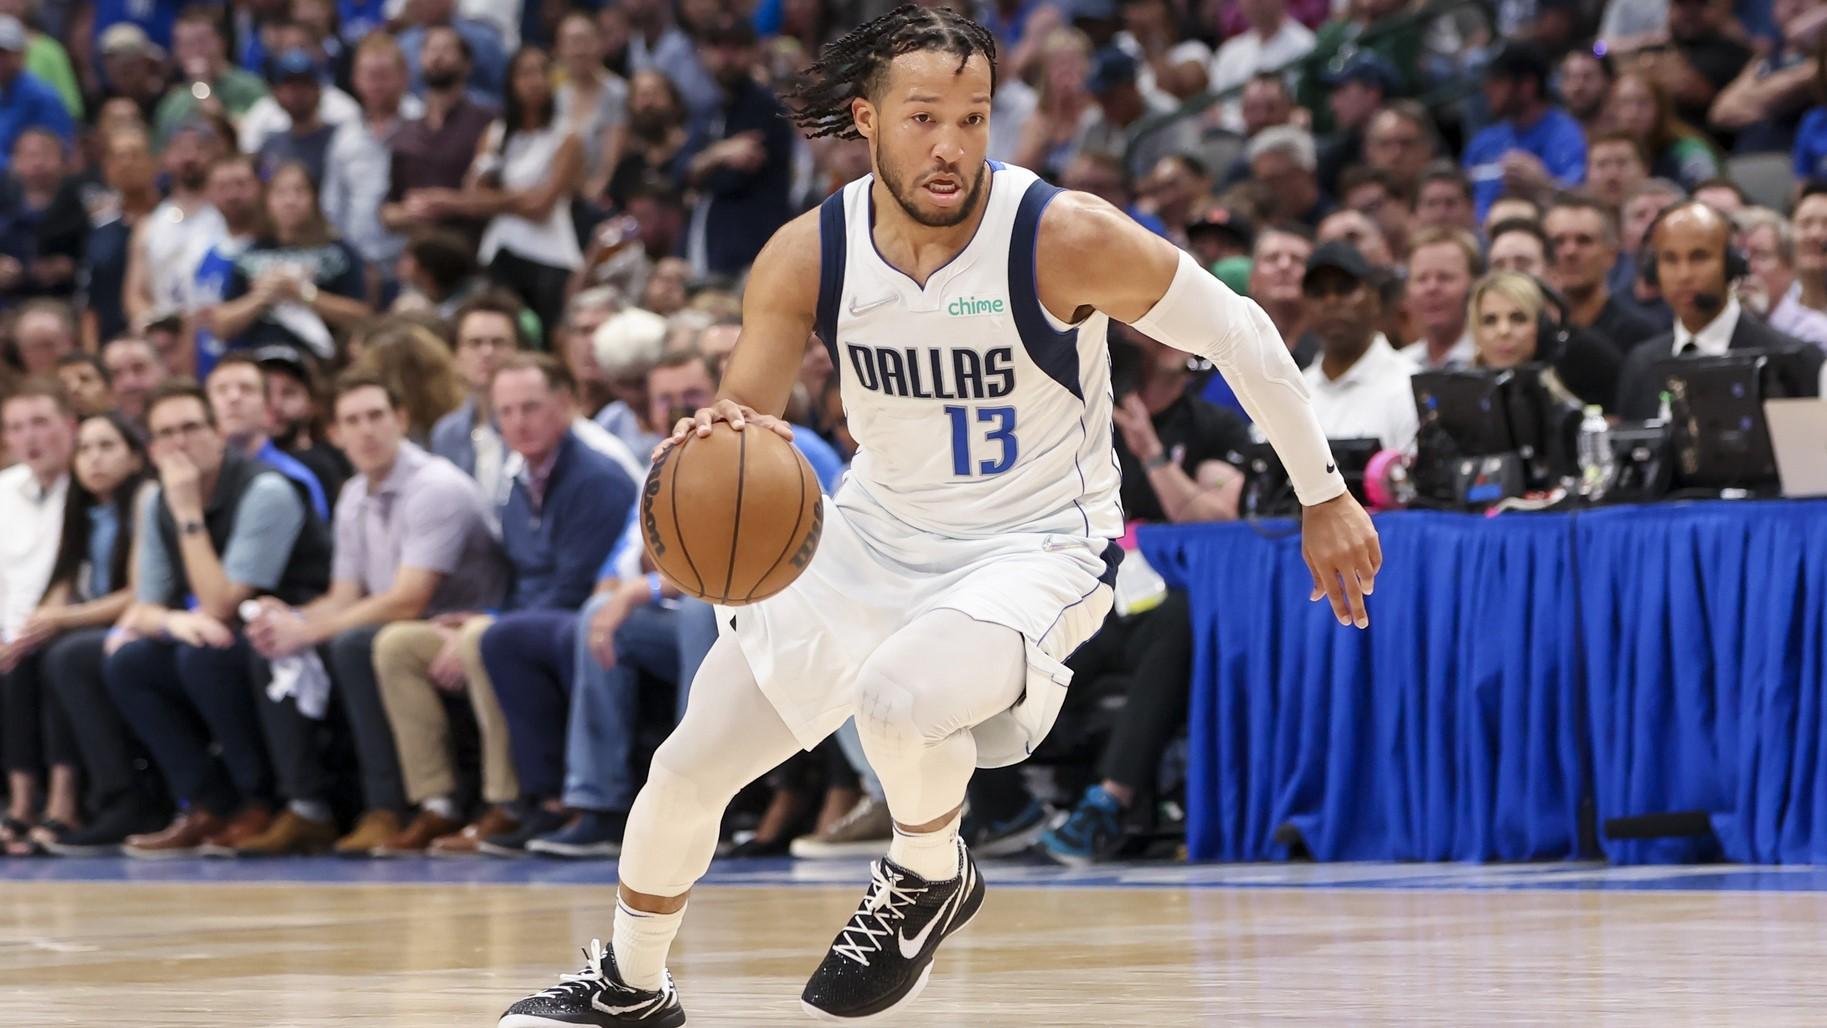 May 6, 2022; Dallas, Texas, USA; Dallas Mavericks guard Jalen Brunson (13) drives to the basket during the third quarter against the Phoenix Suns in game three of the second round of the 2022 NBA playoffs at American Airlines Center. / Kevin Jairaj-USA TODAY Sports